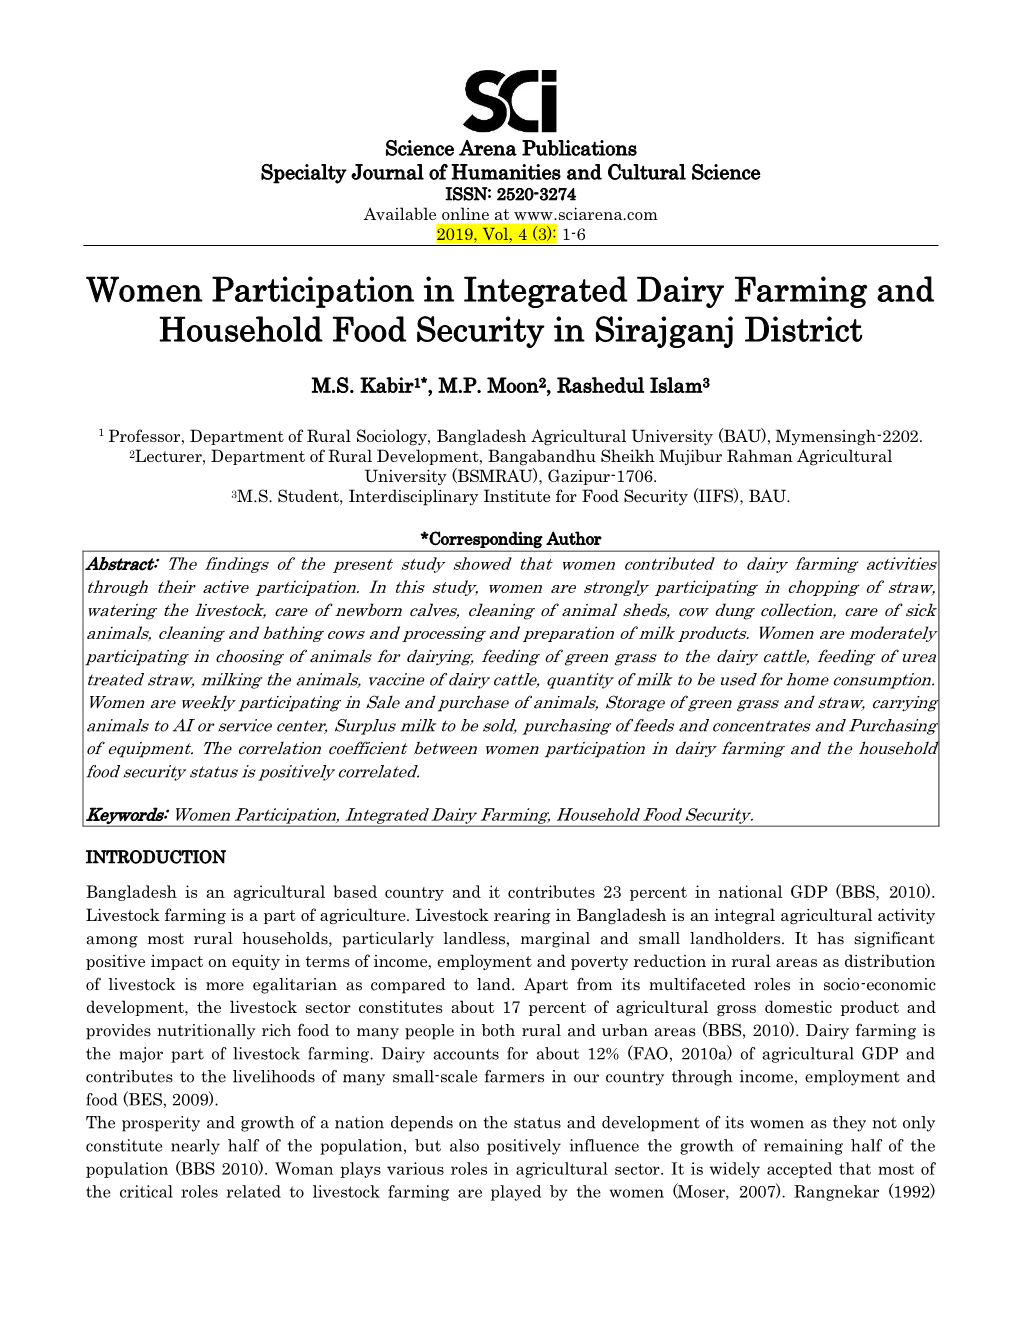 Women Participation in Integrated Dairy Farming and Household Food Security in Sirajganj District